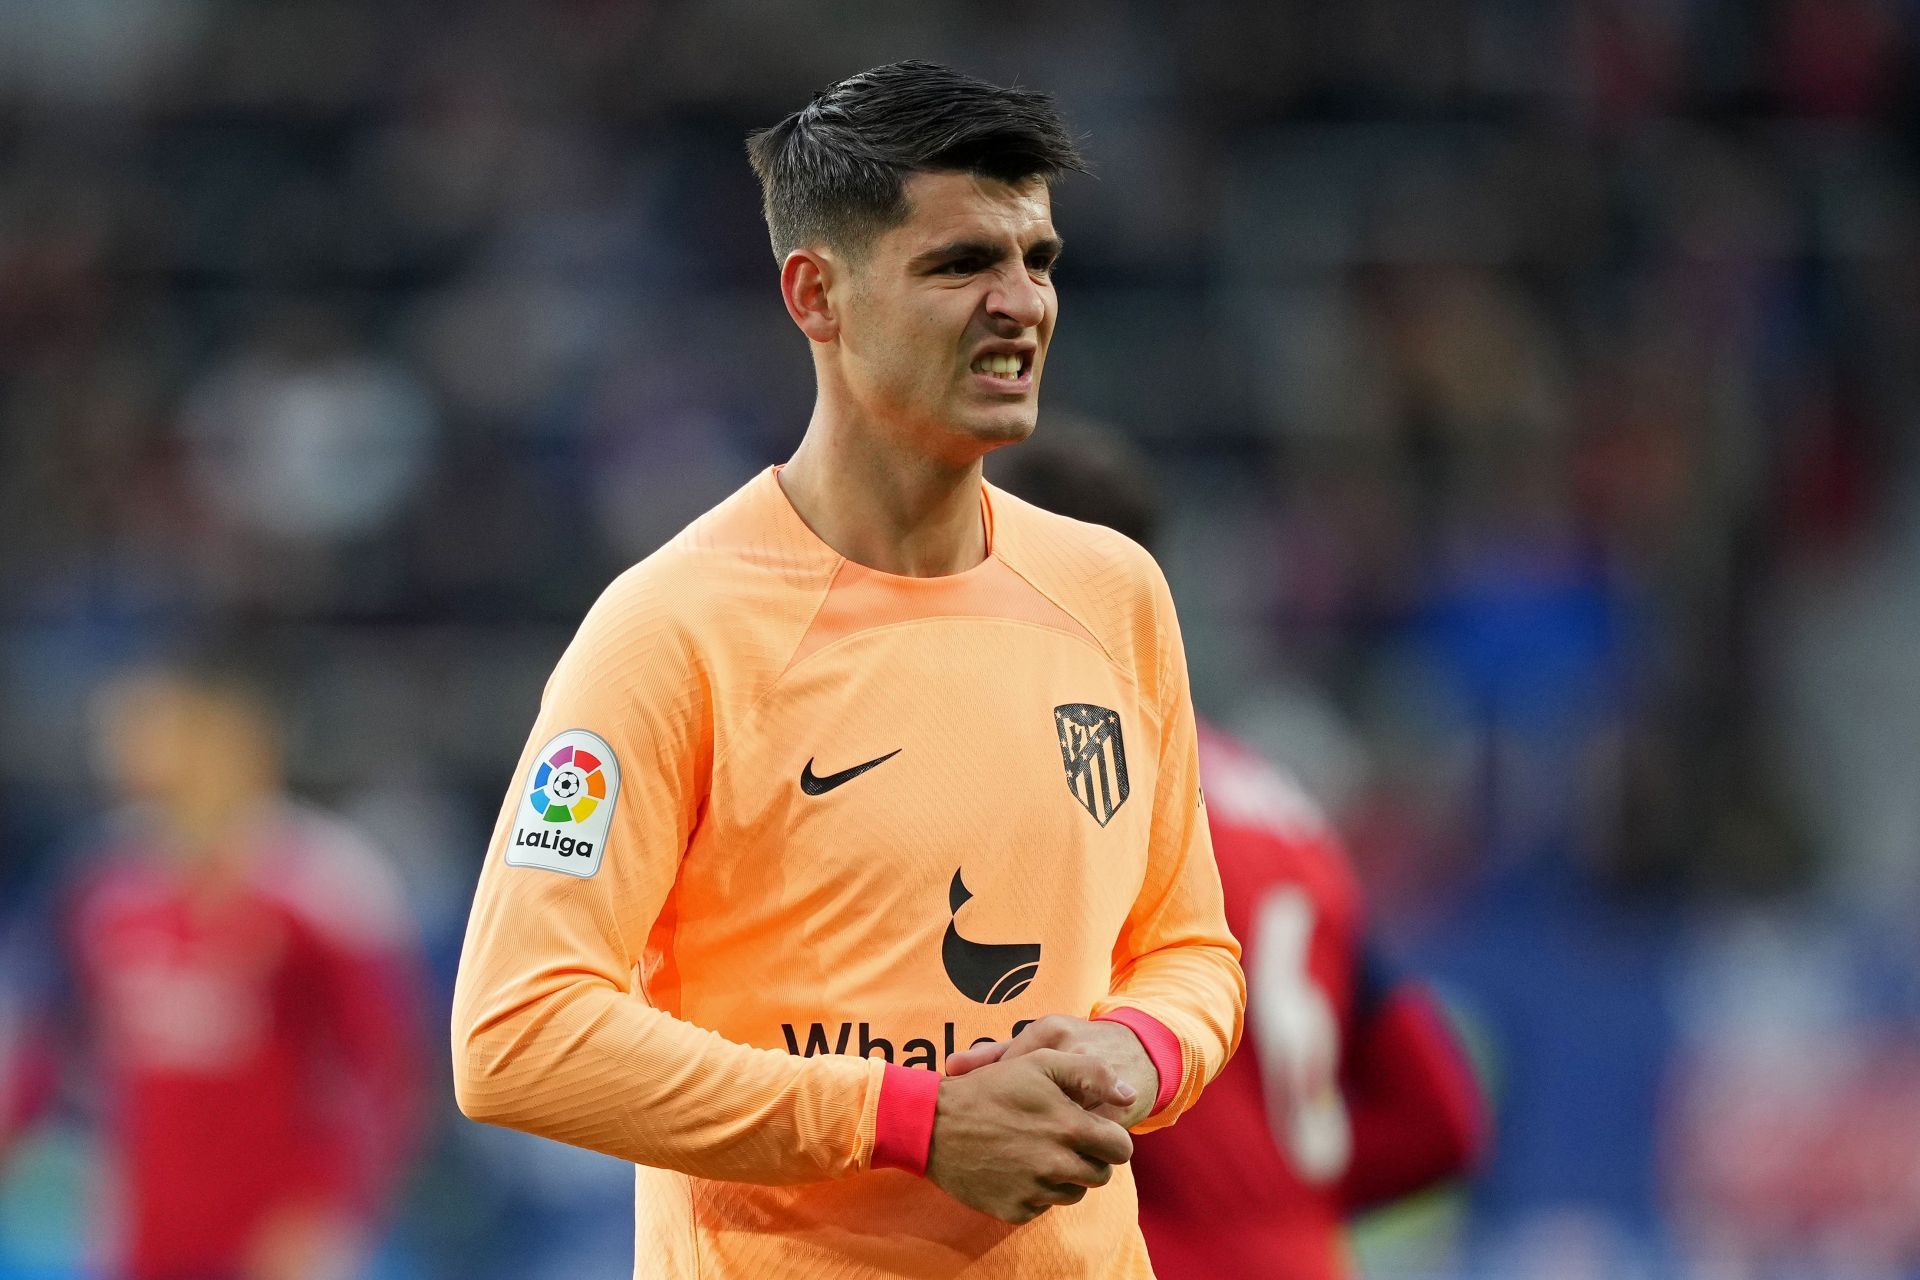 Alvaro Morata makes his feeling clear about racism in Spanish football.